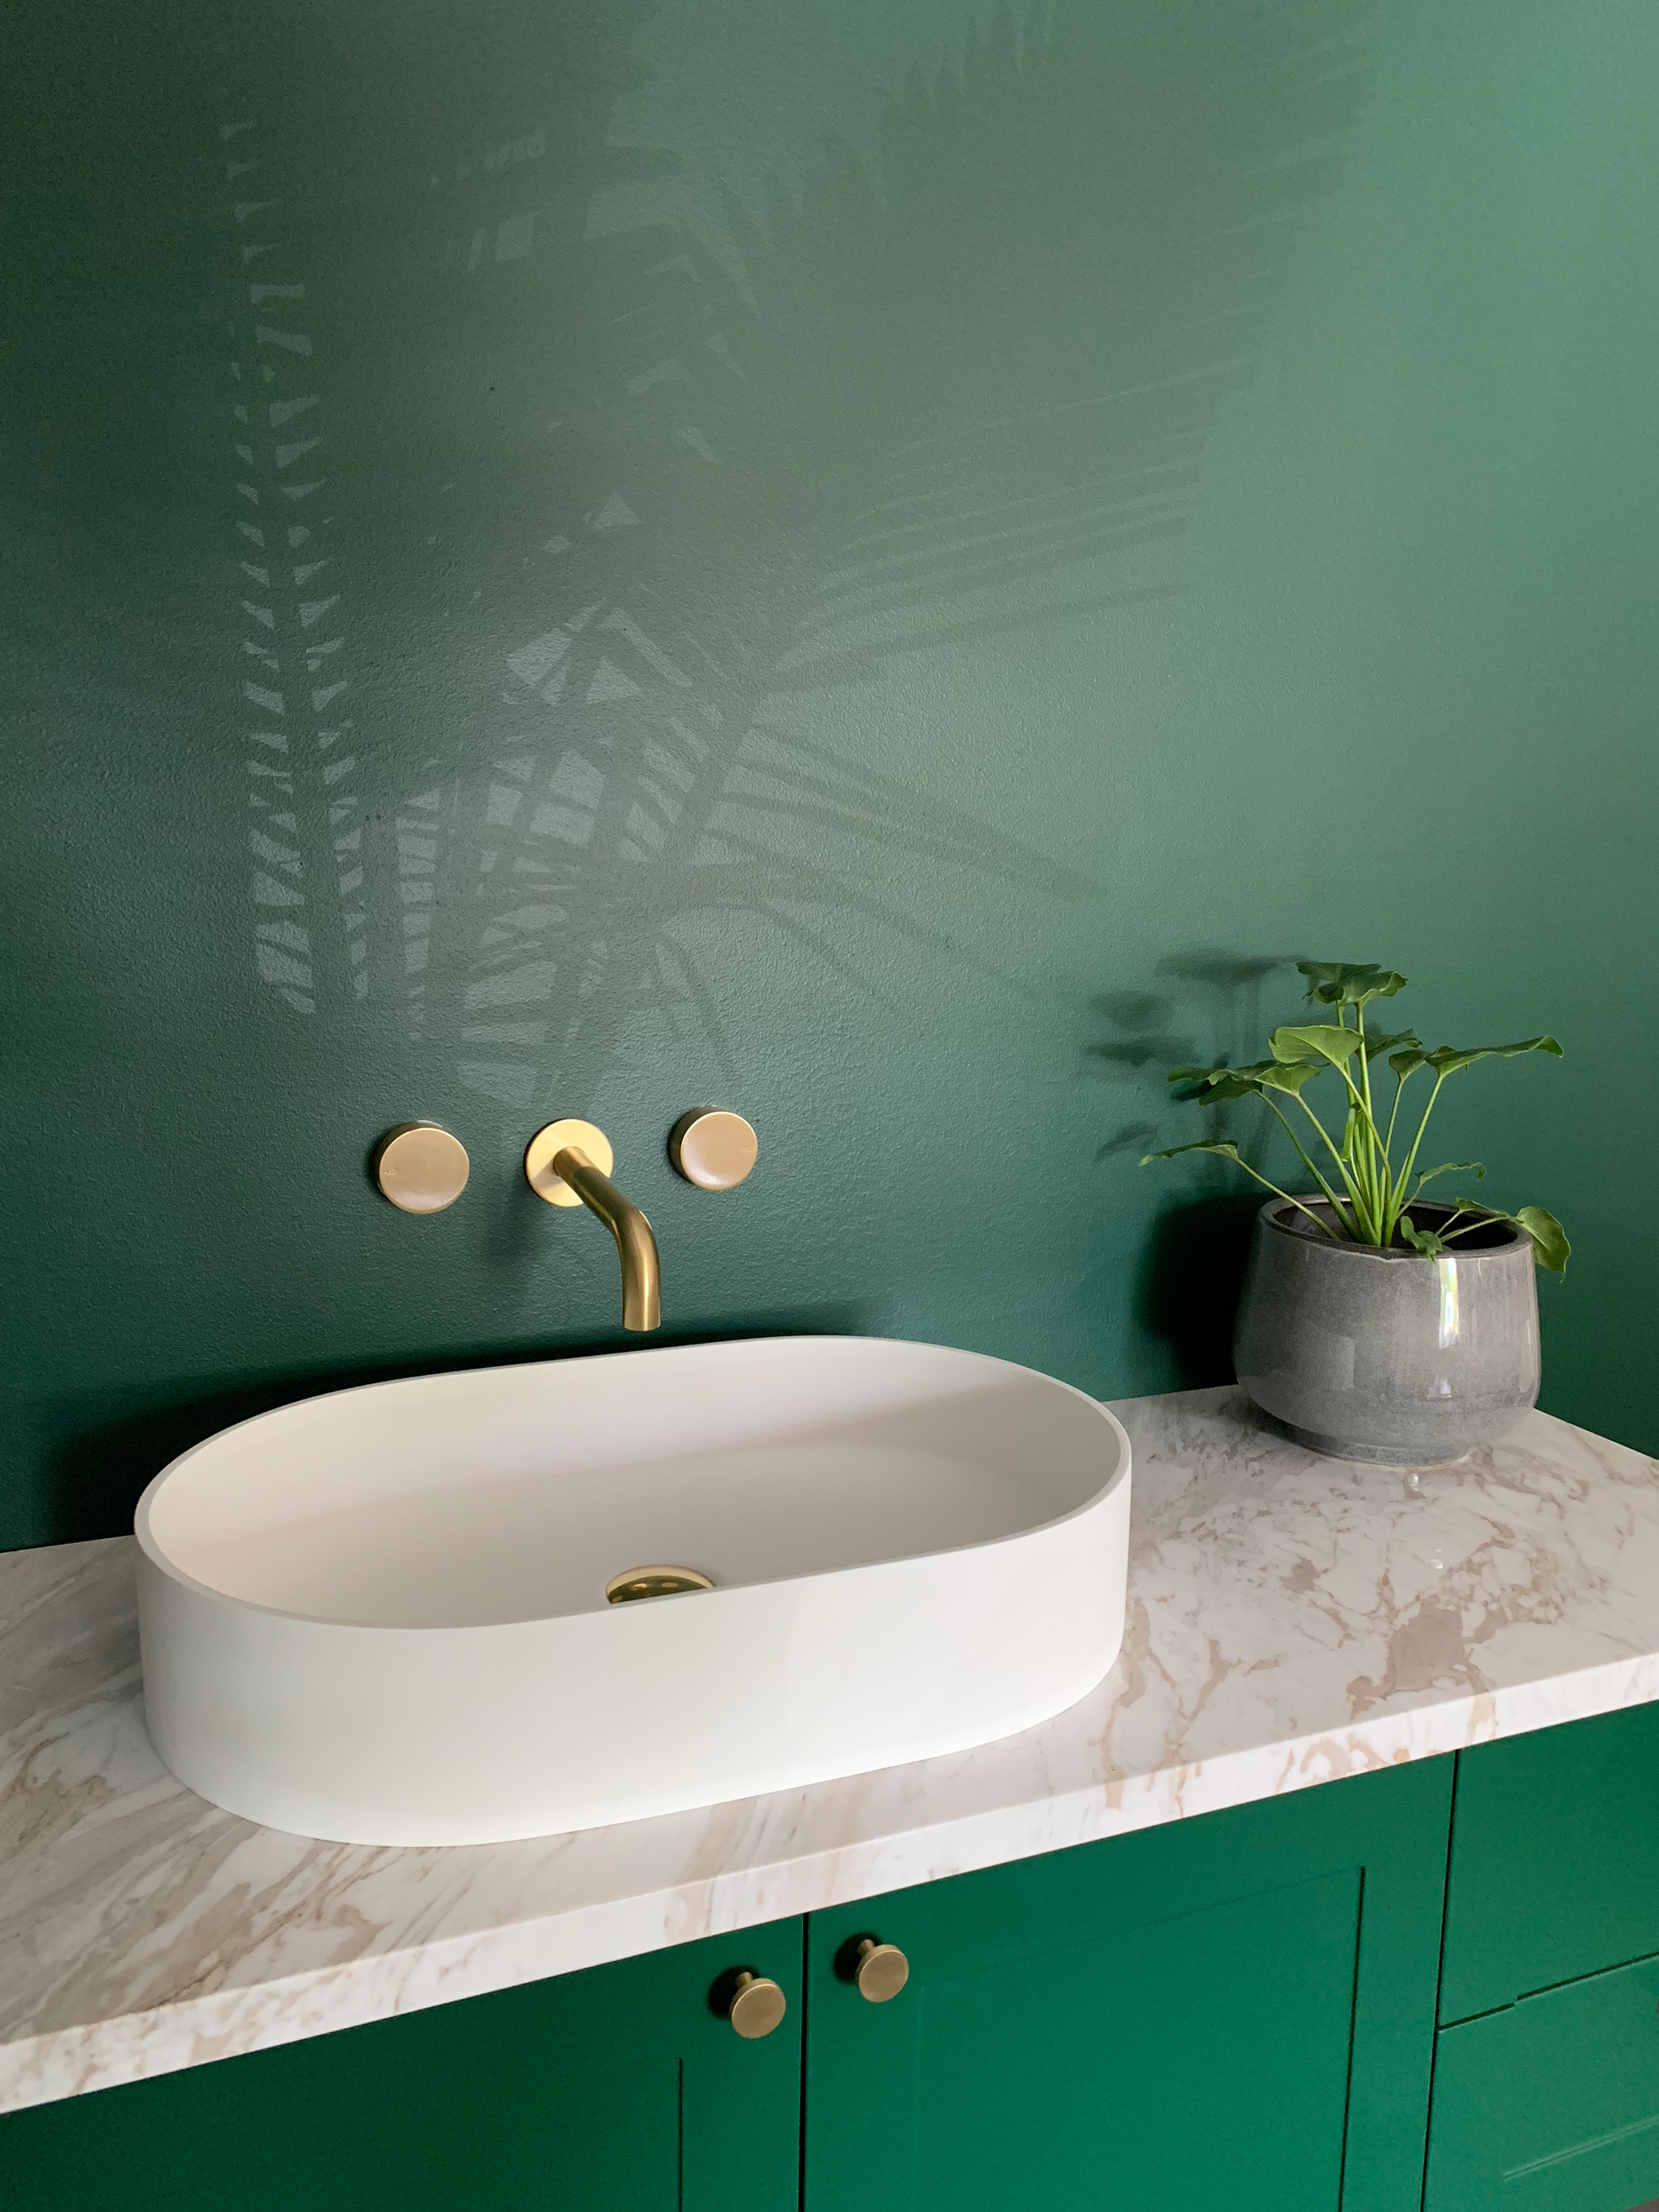 Bring some colour into 2019 with Highgrove Bathrooms ...
